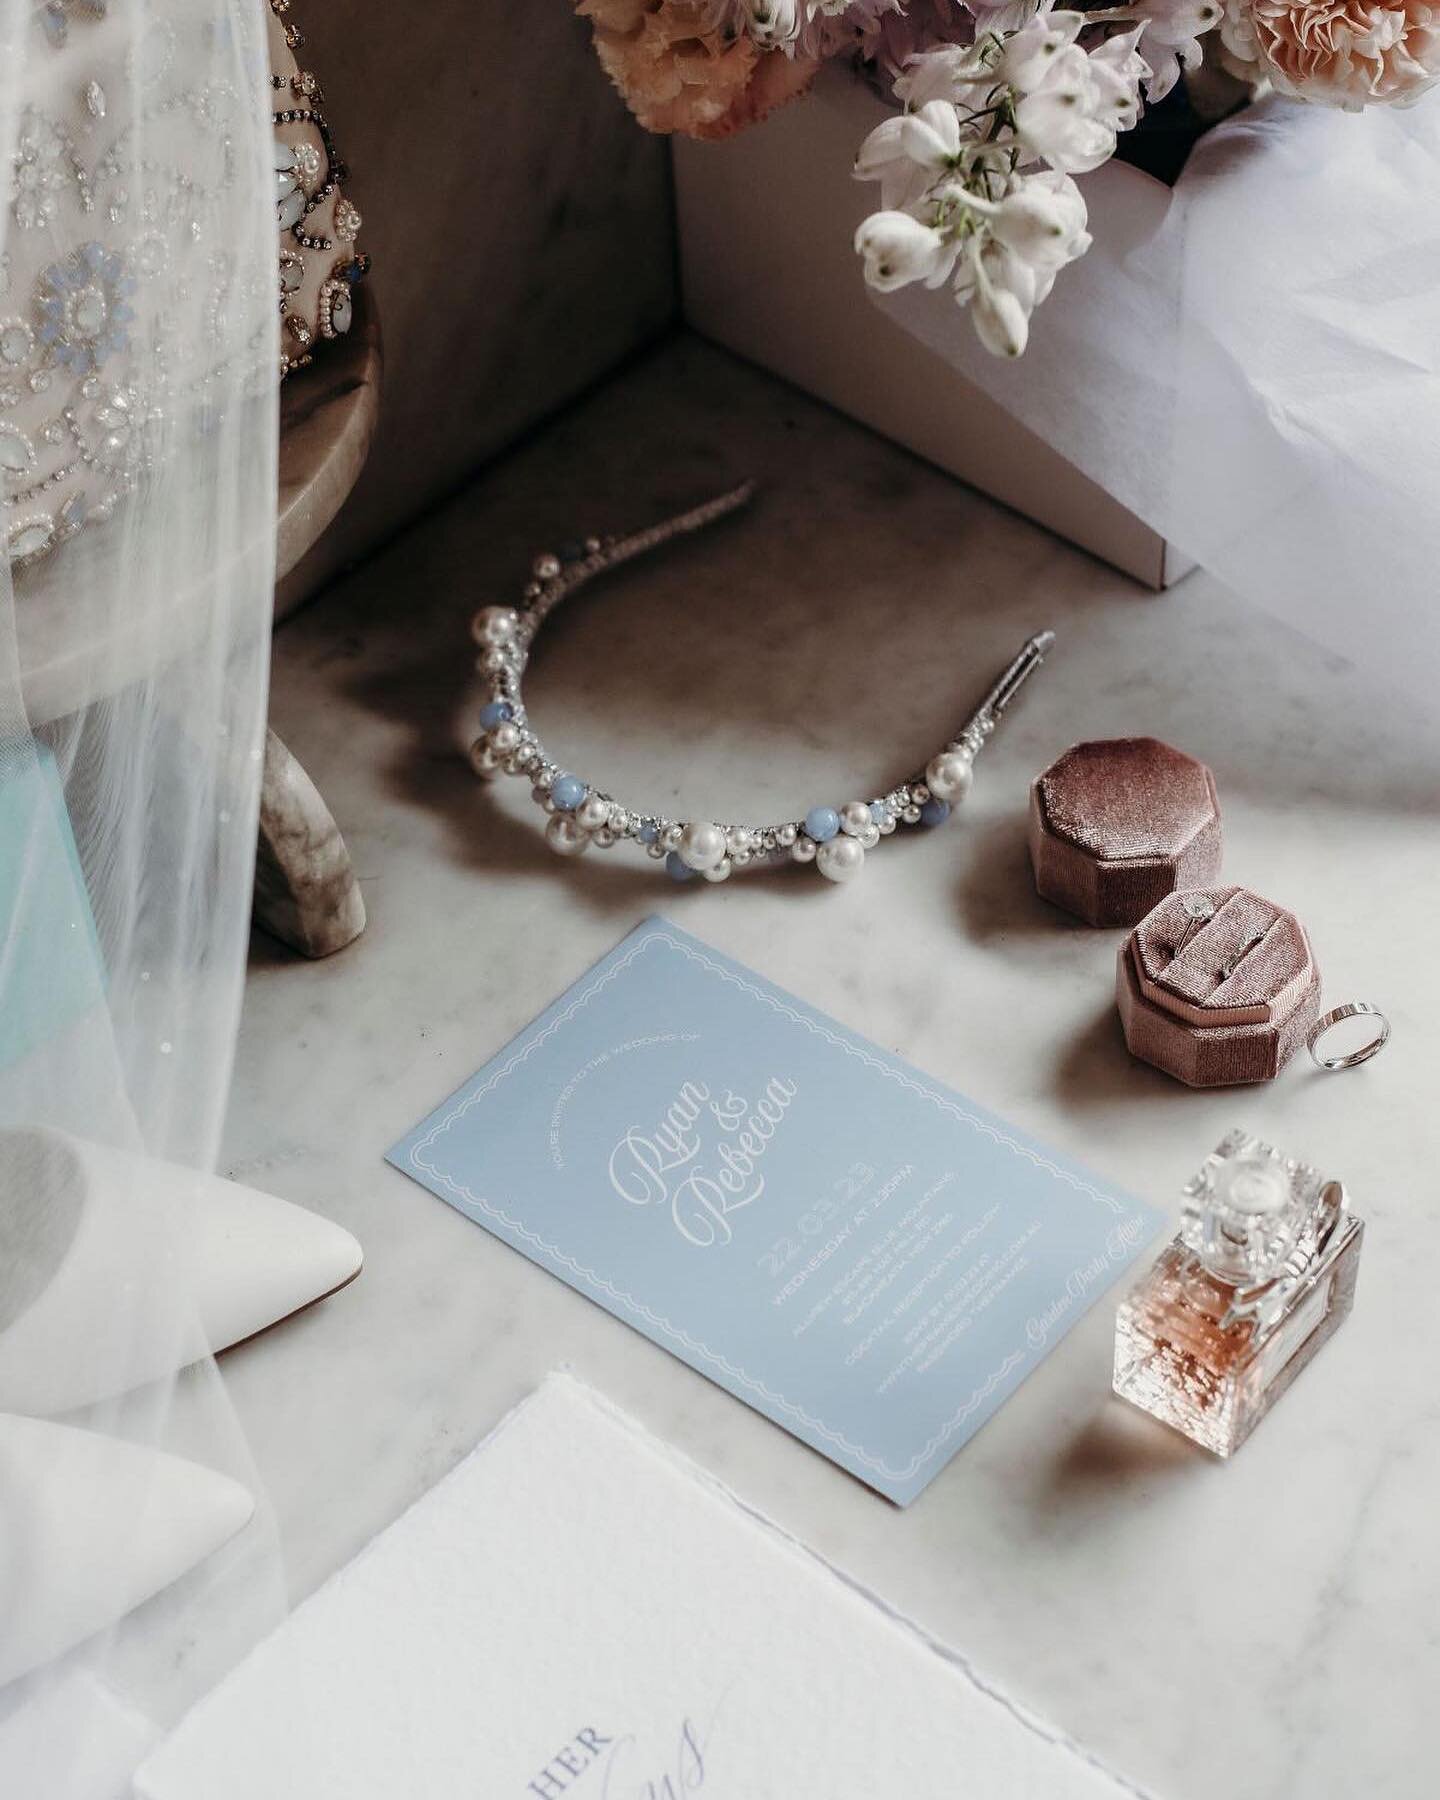 Dreamy detail shots! An essential in our eyes for any wedding.

We know how much time has gone into finding the perfect pair of earrings, choosing the right shoes or writing those heartfelt vows. These finer details beautifully tell your wedding day 